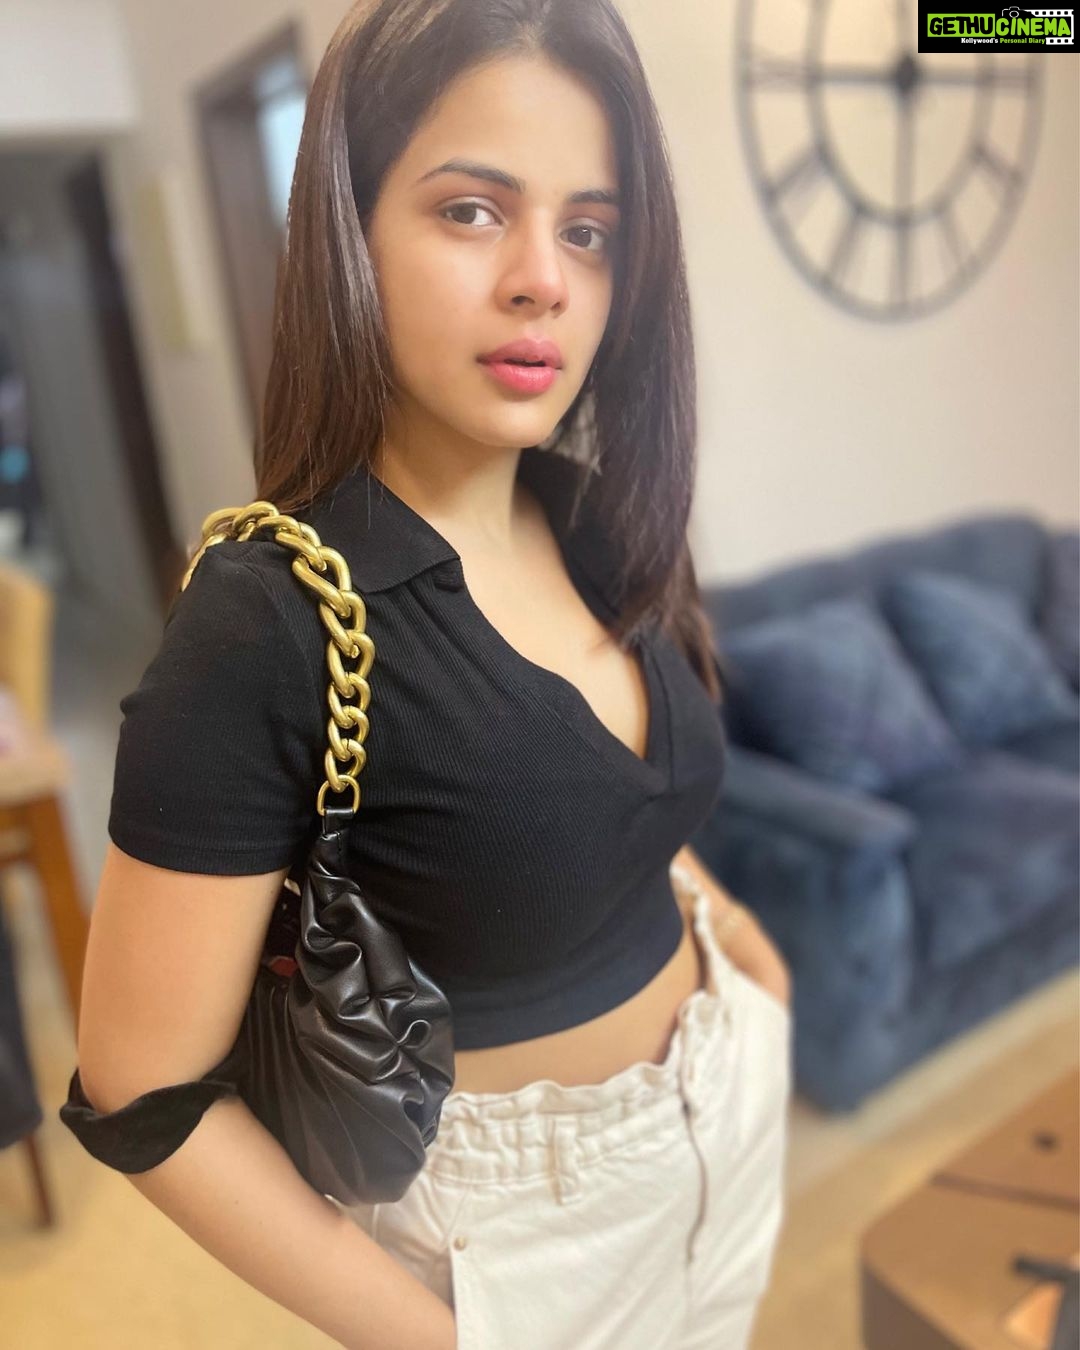 Jigyasa Singh - 56.1K Likes - Most Liked Instagram Photos